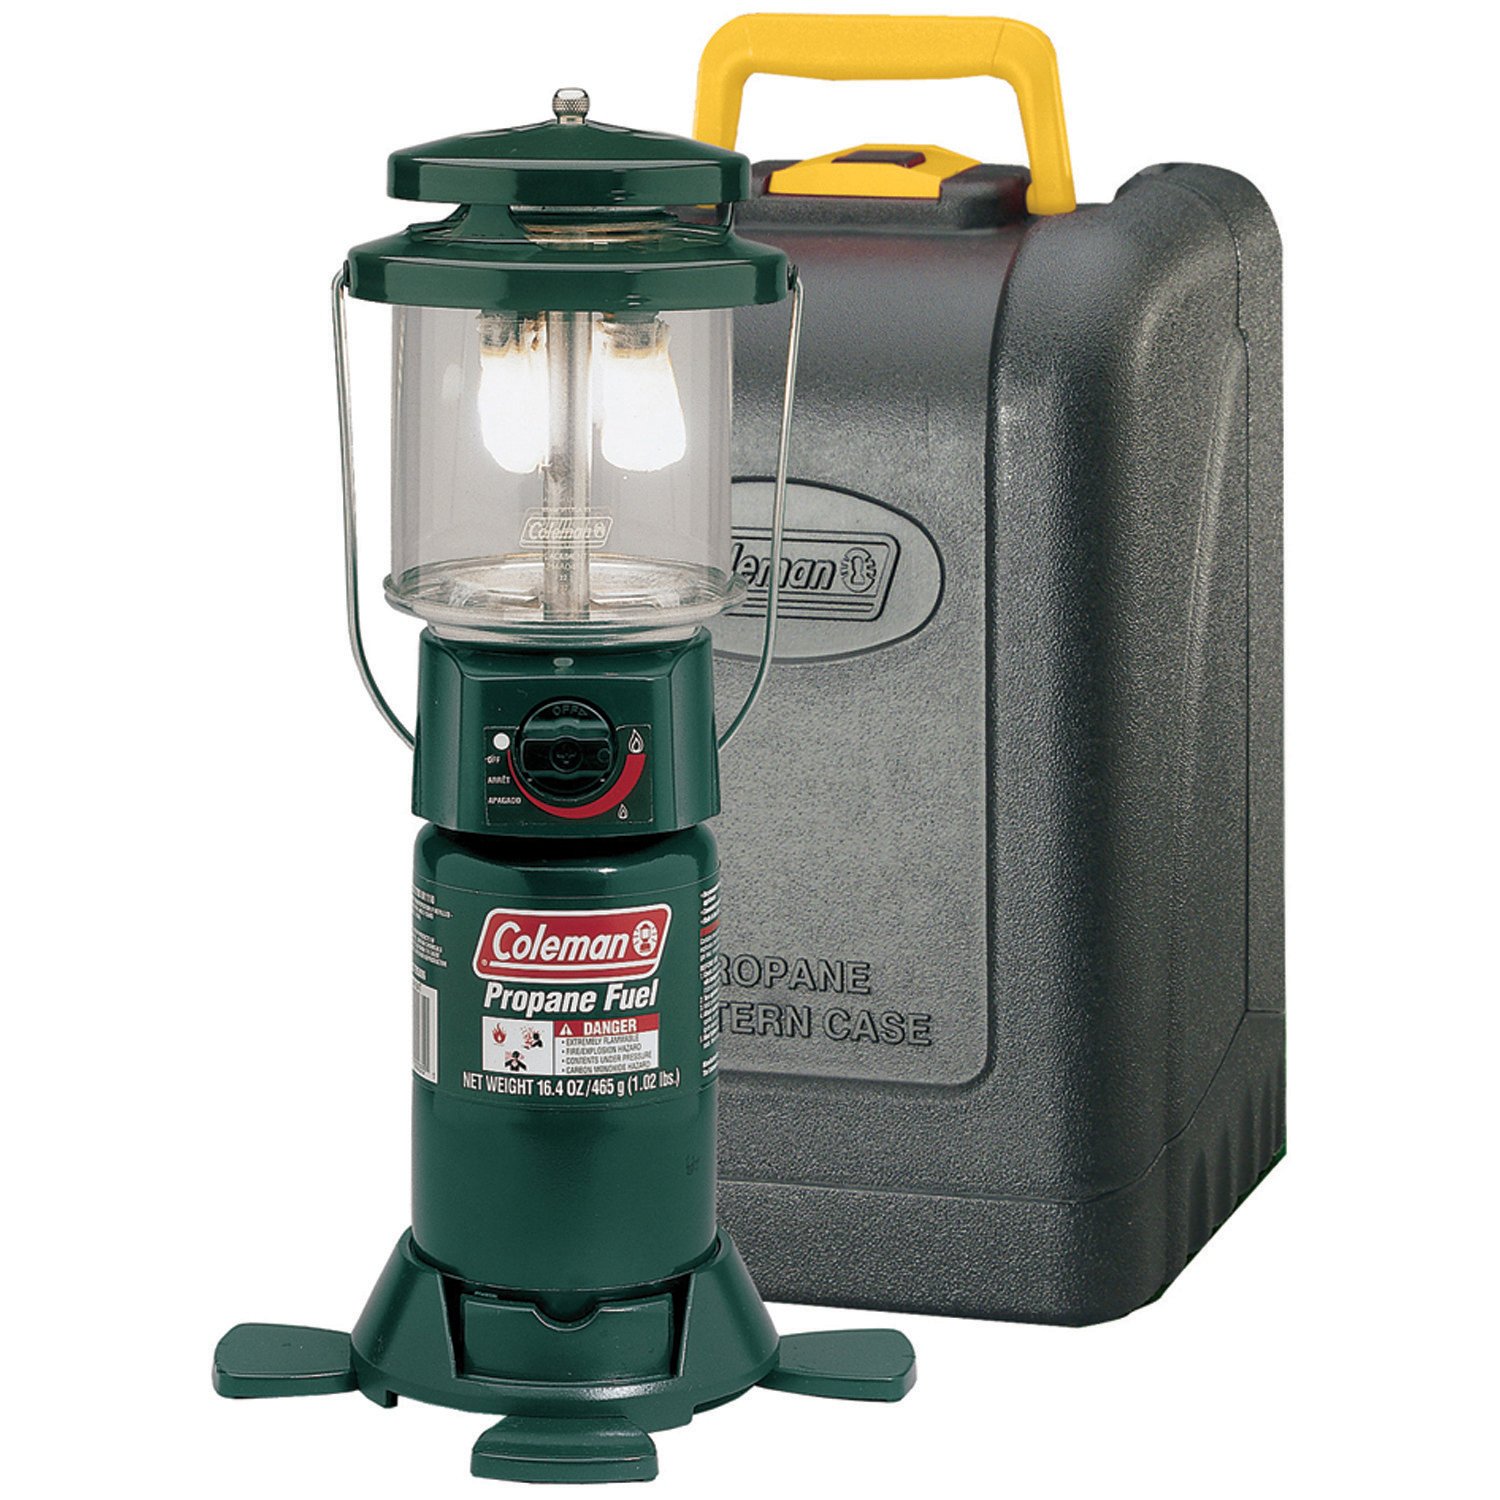 Propane Lanterns: For Camping & Outdoors